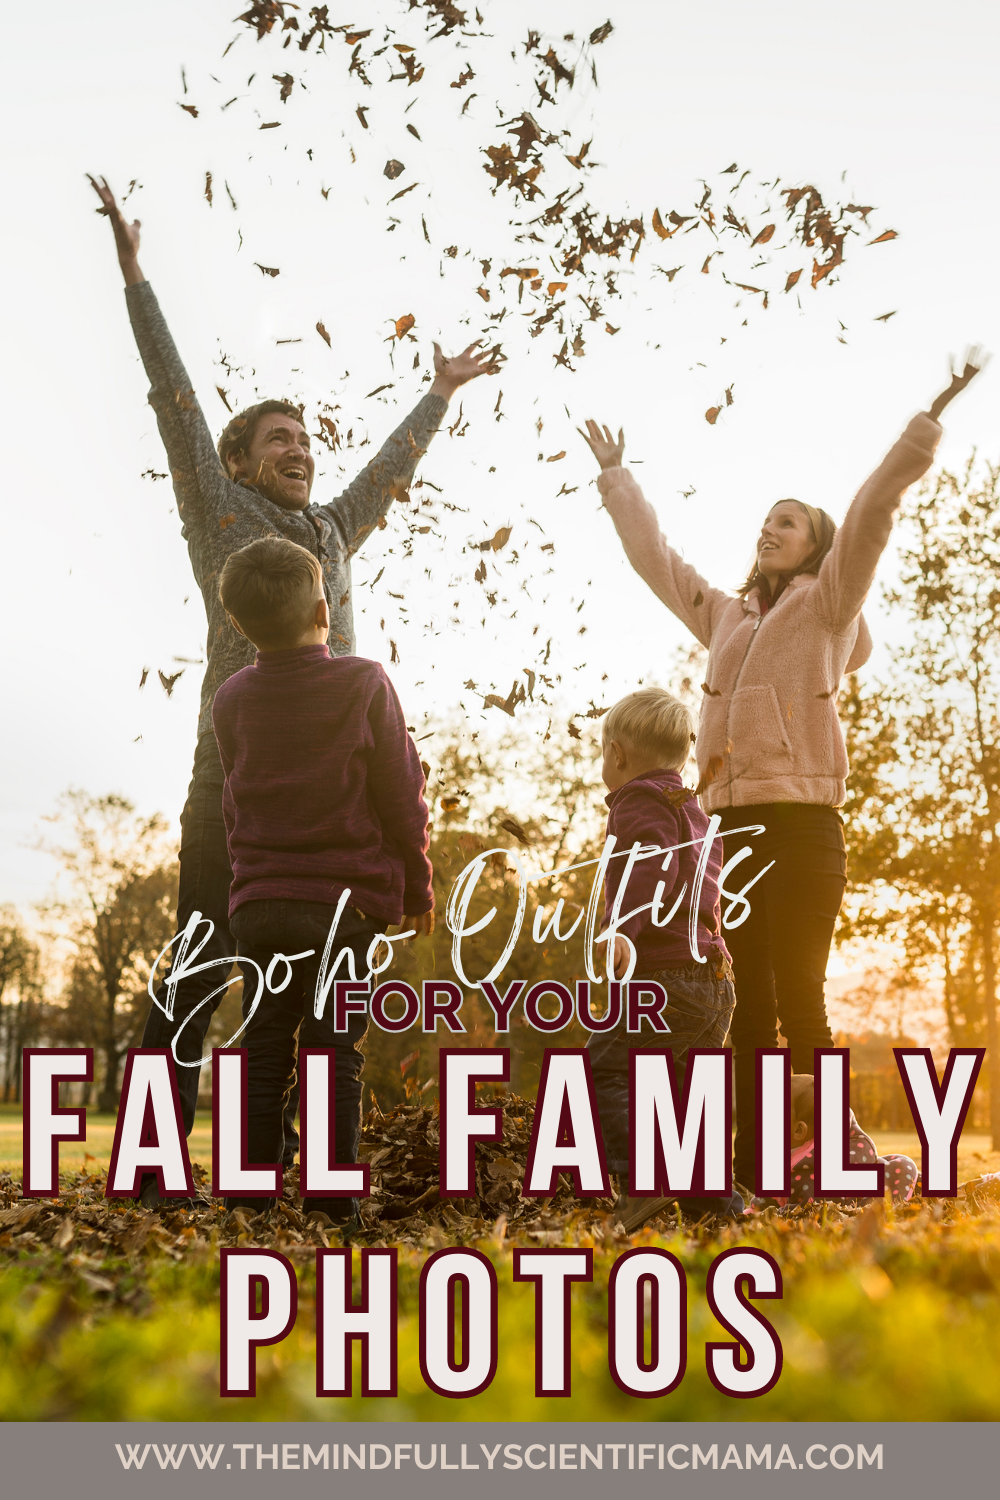 An image of a family of 4 throwing leaves into the air with the sun glaring behind them. The text reads 